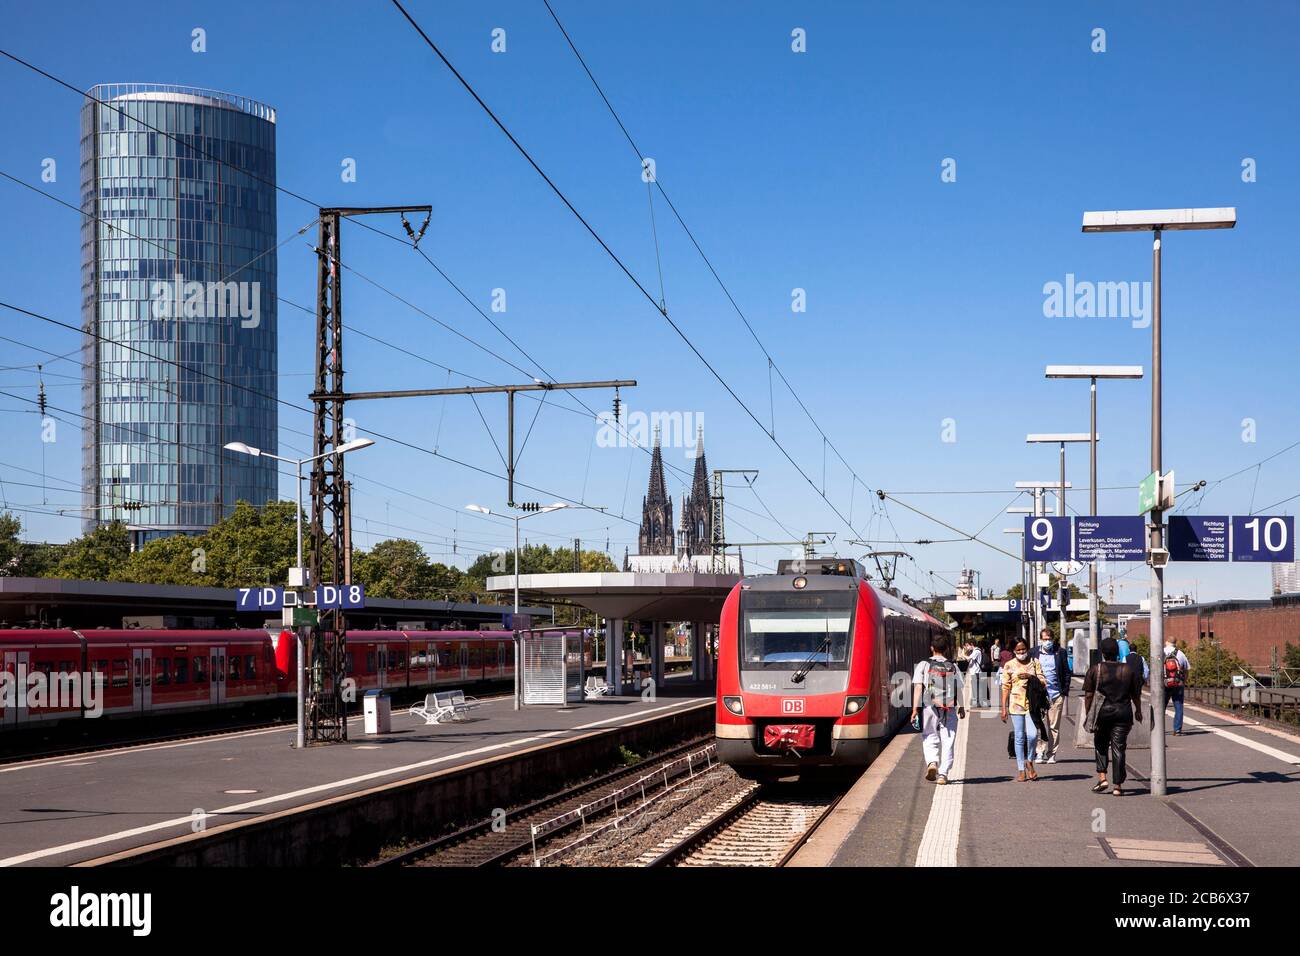 the station Messe-Deutz, CologneTriangle Tower, in the background the cathedral, Cologne, Germany.  der Bahnhof Messe-Deutz, KoelnTriangle Turm, im Hi Stock Photo